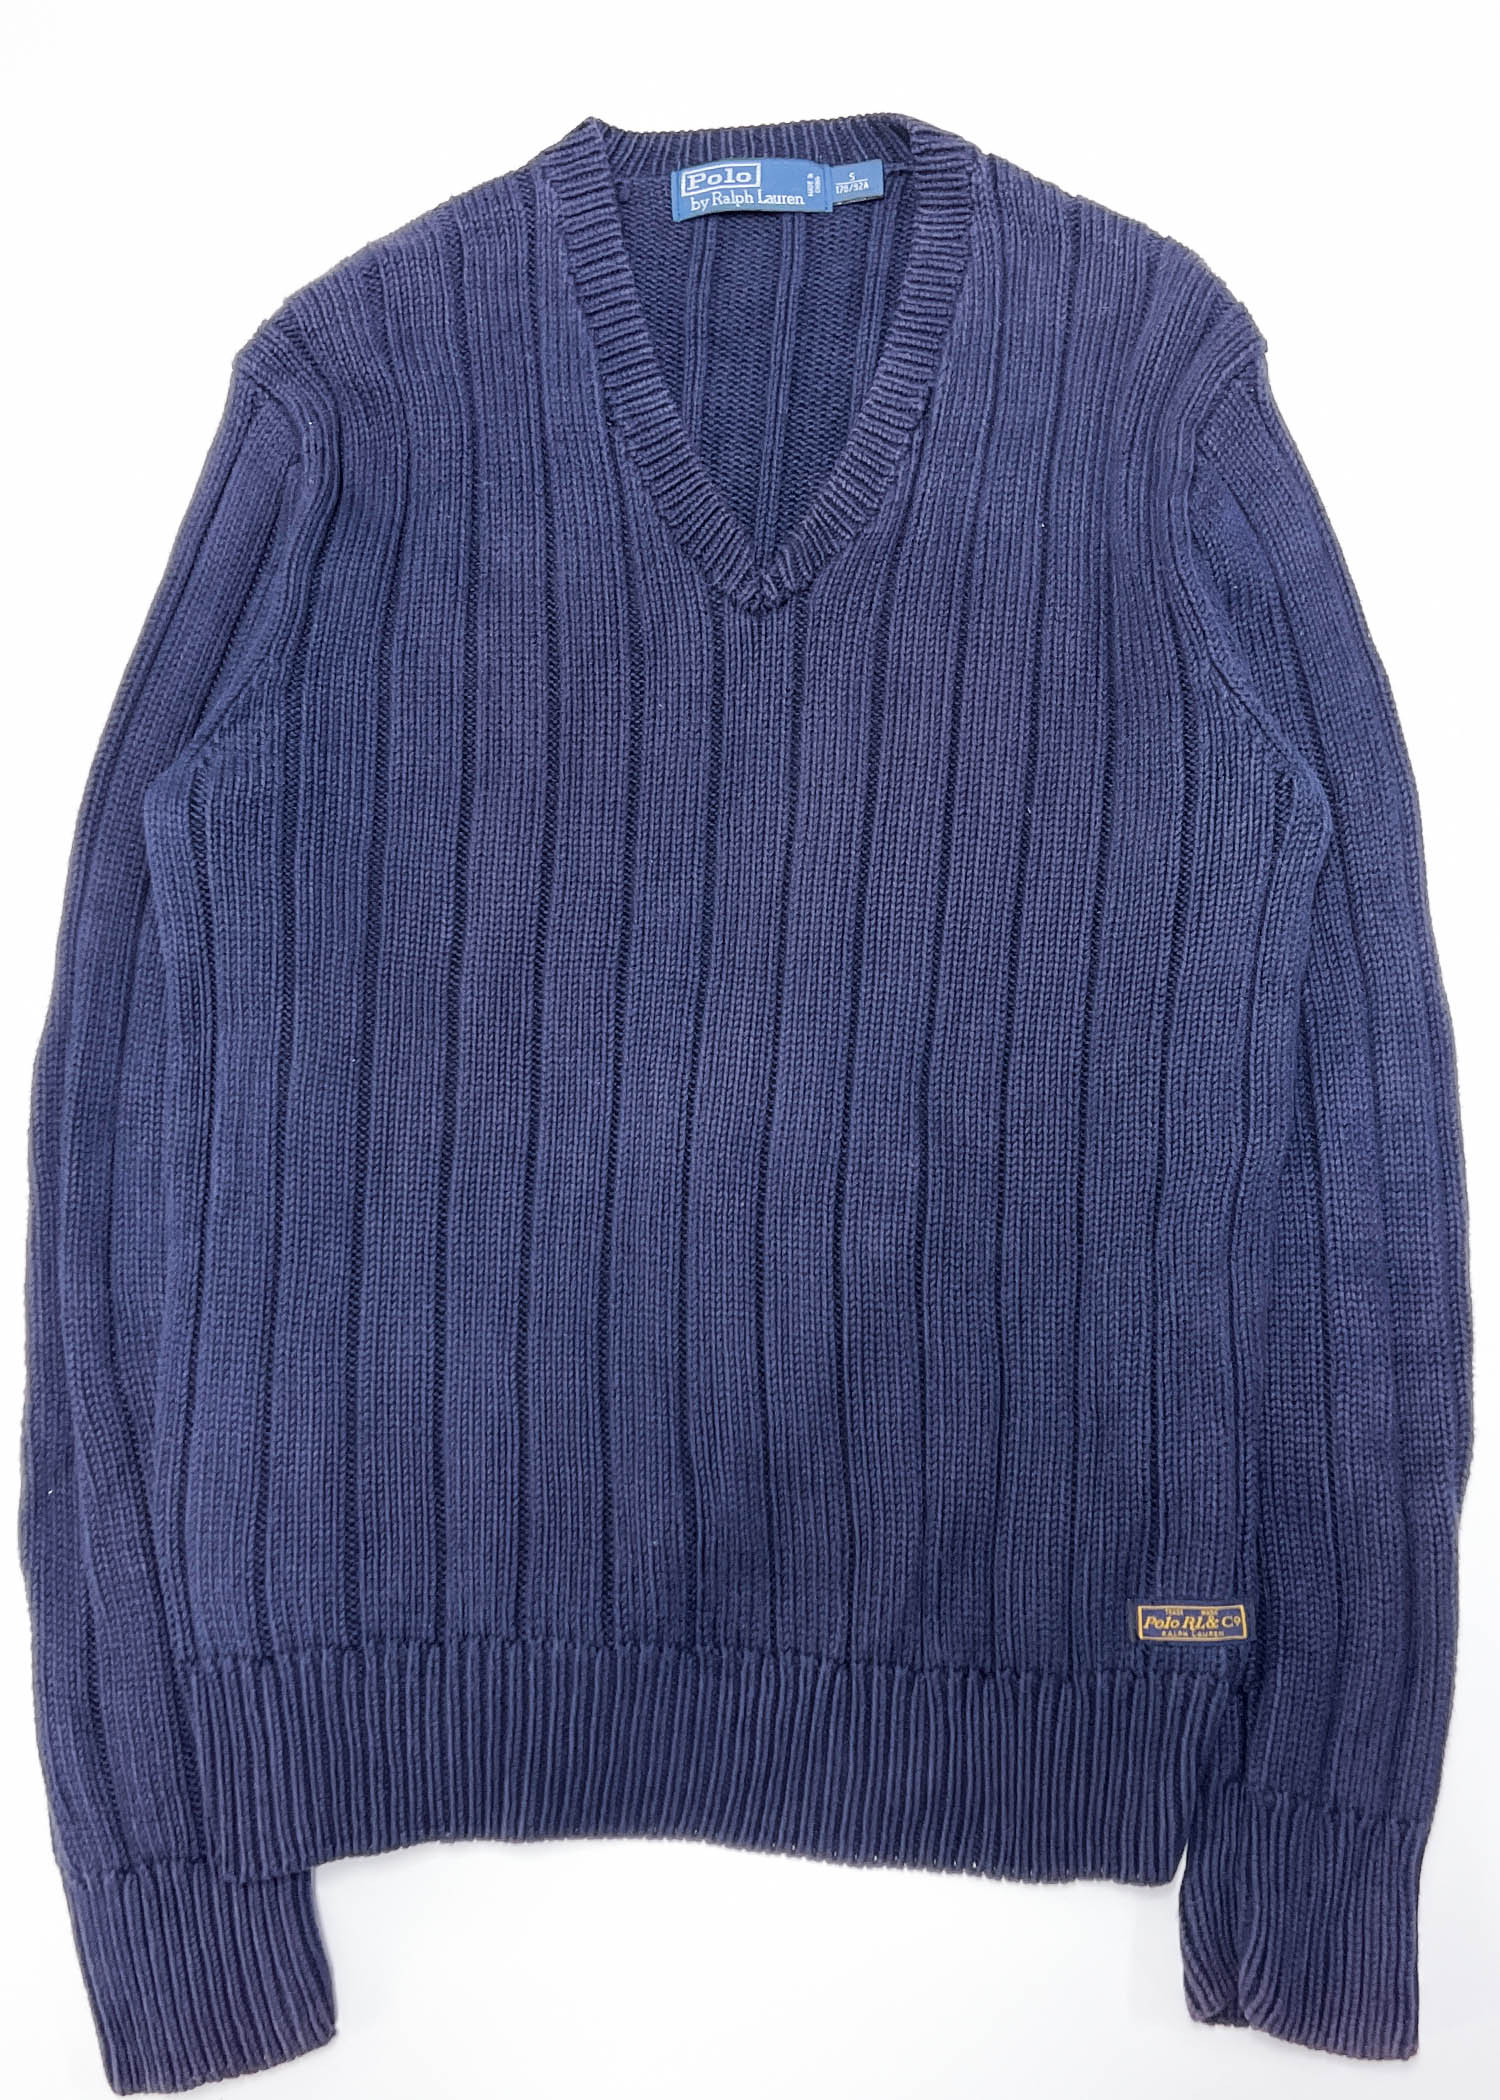 Polo by Ralph Lauren V neck knit